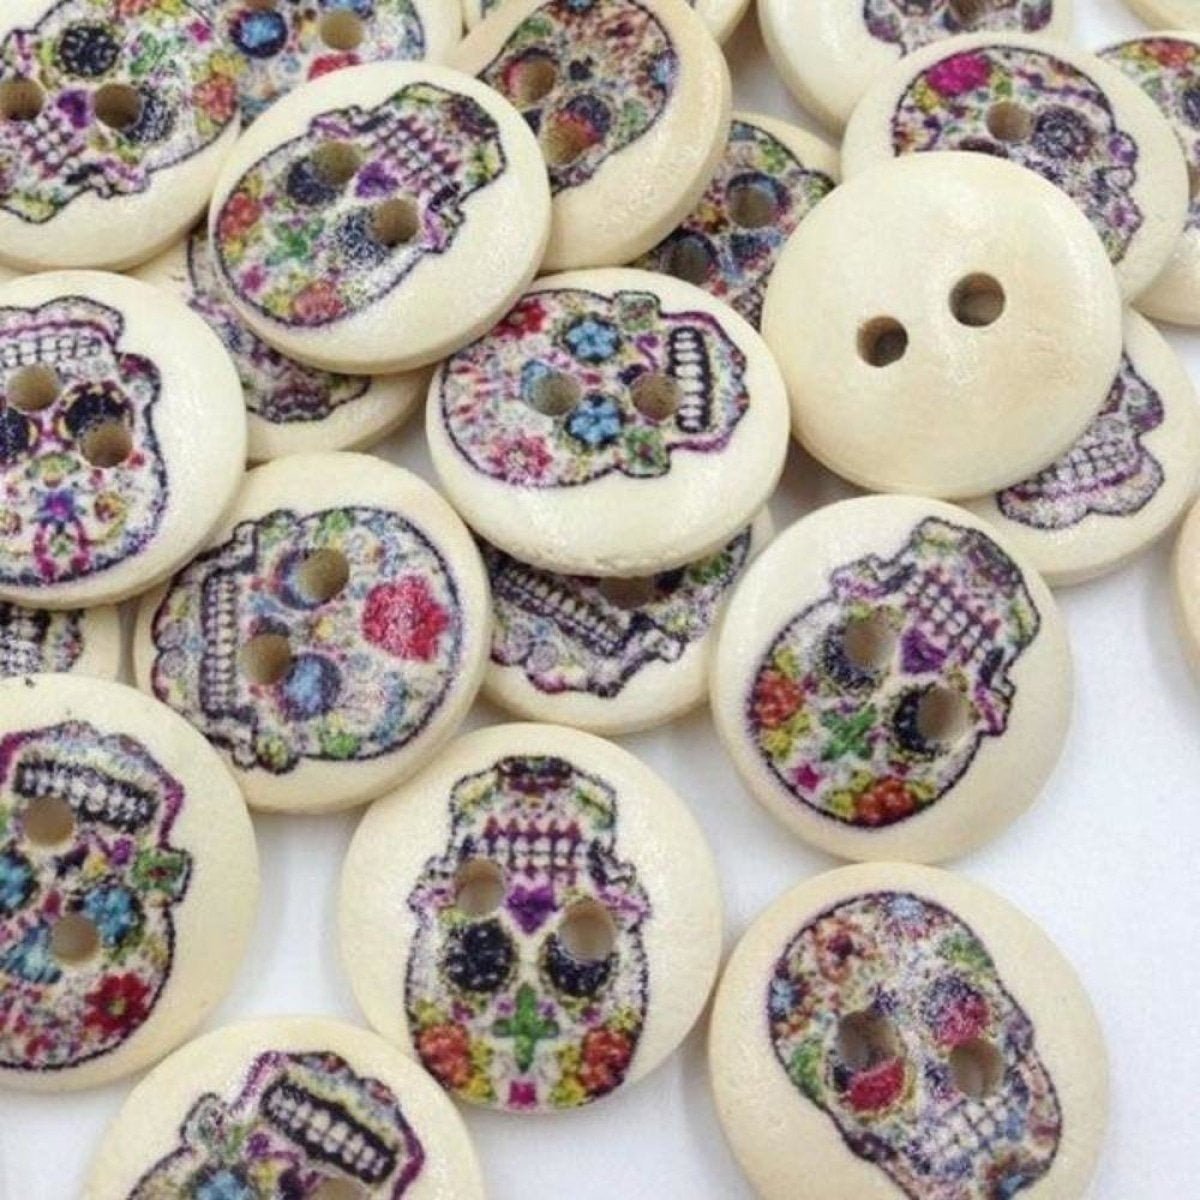 100pcs Mixed Wooden Buttons Flower for Clothing Craft Sewing DIY 2 Hole 15mm - Skulls - - Asia Sell